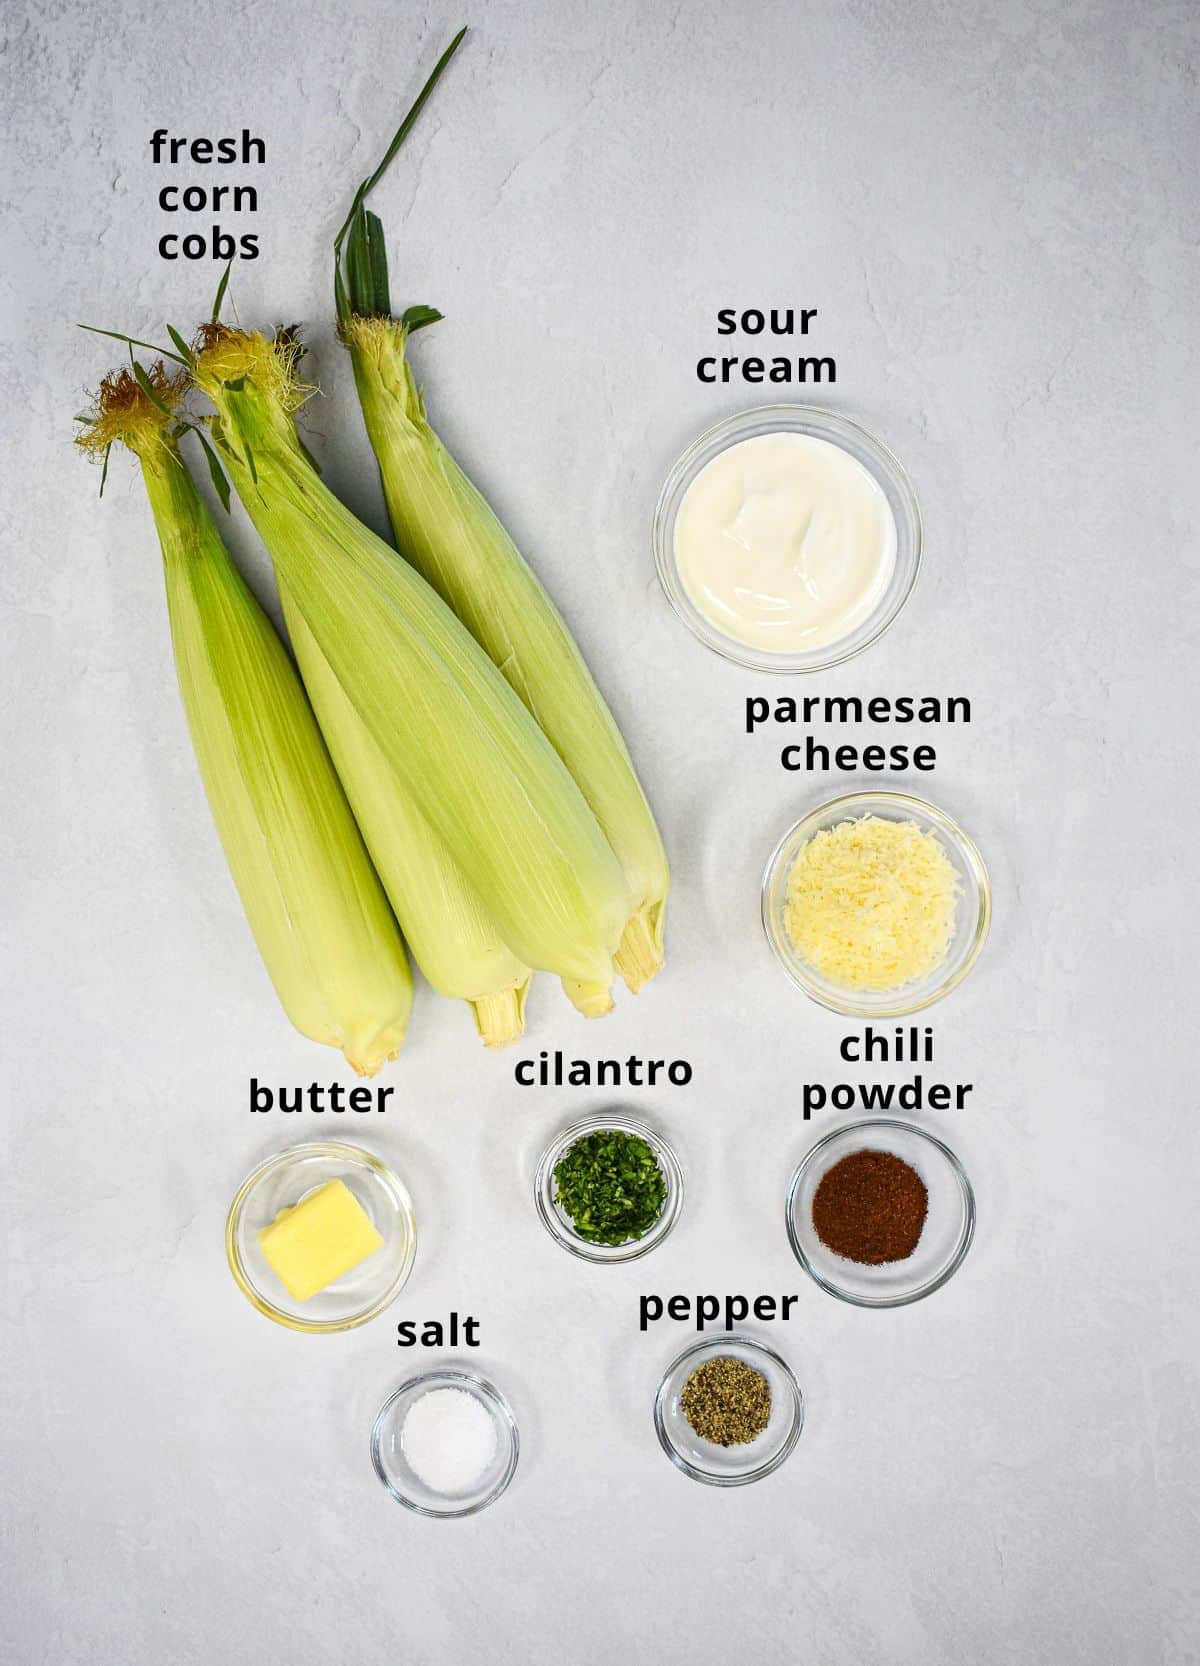 The ingredients for the recipe arranged on a white table with each labeled with small black letters.